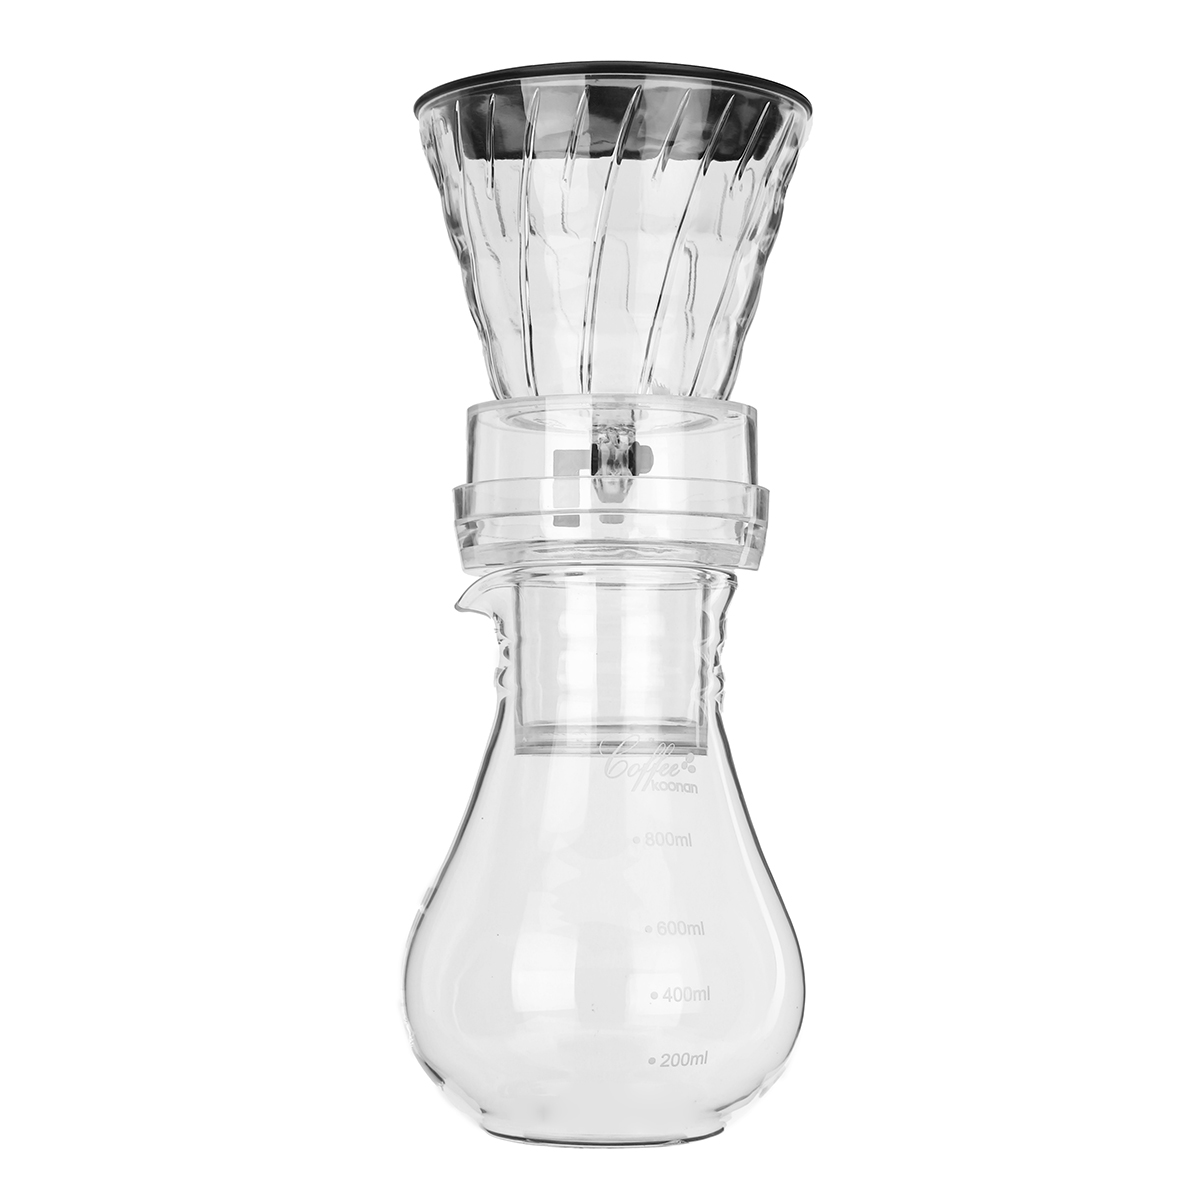 1000mL-Glass-Cold-Iced-Drip-Brew-Home-Coffee-Maker-Pot-Pour-Over-Coffee-Maker-Coffee-Machine-1315102-2